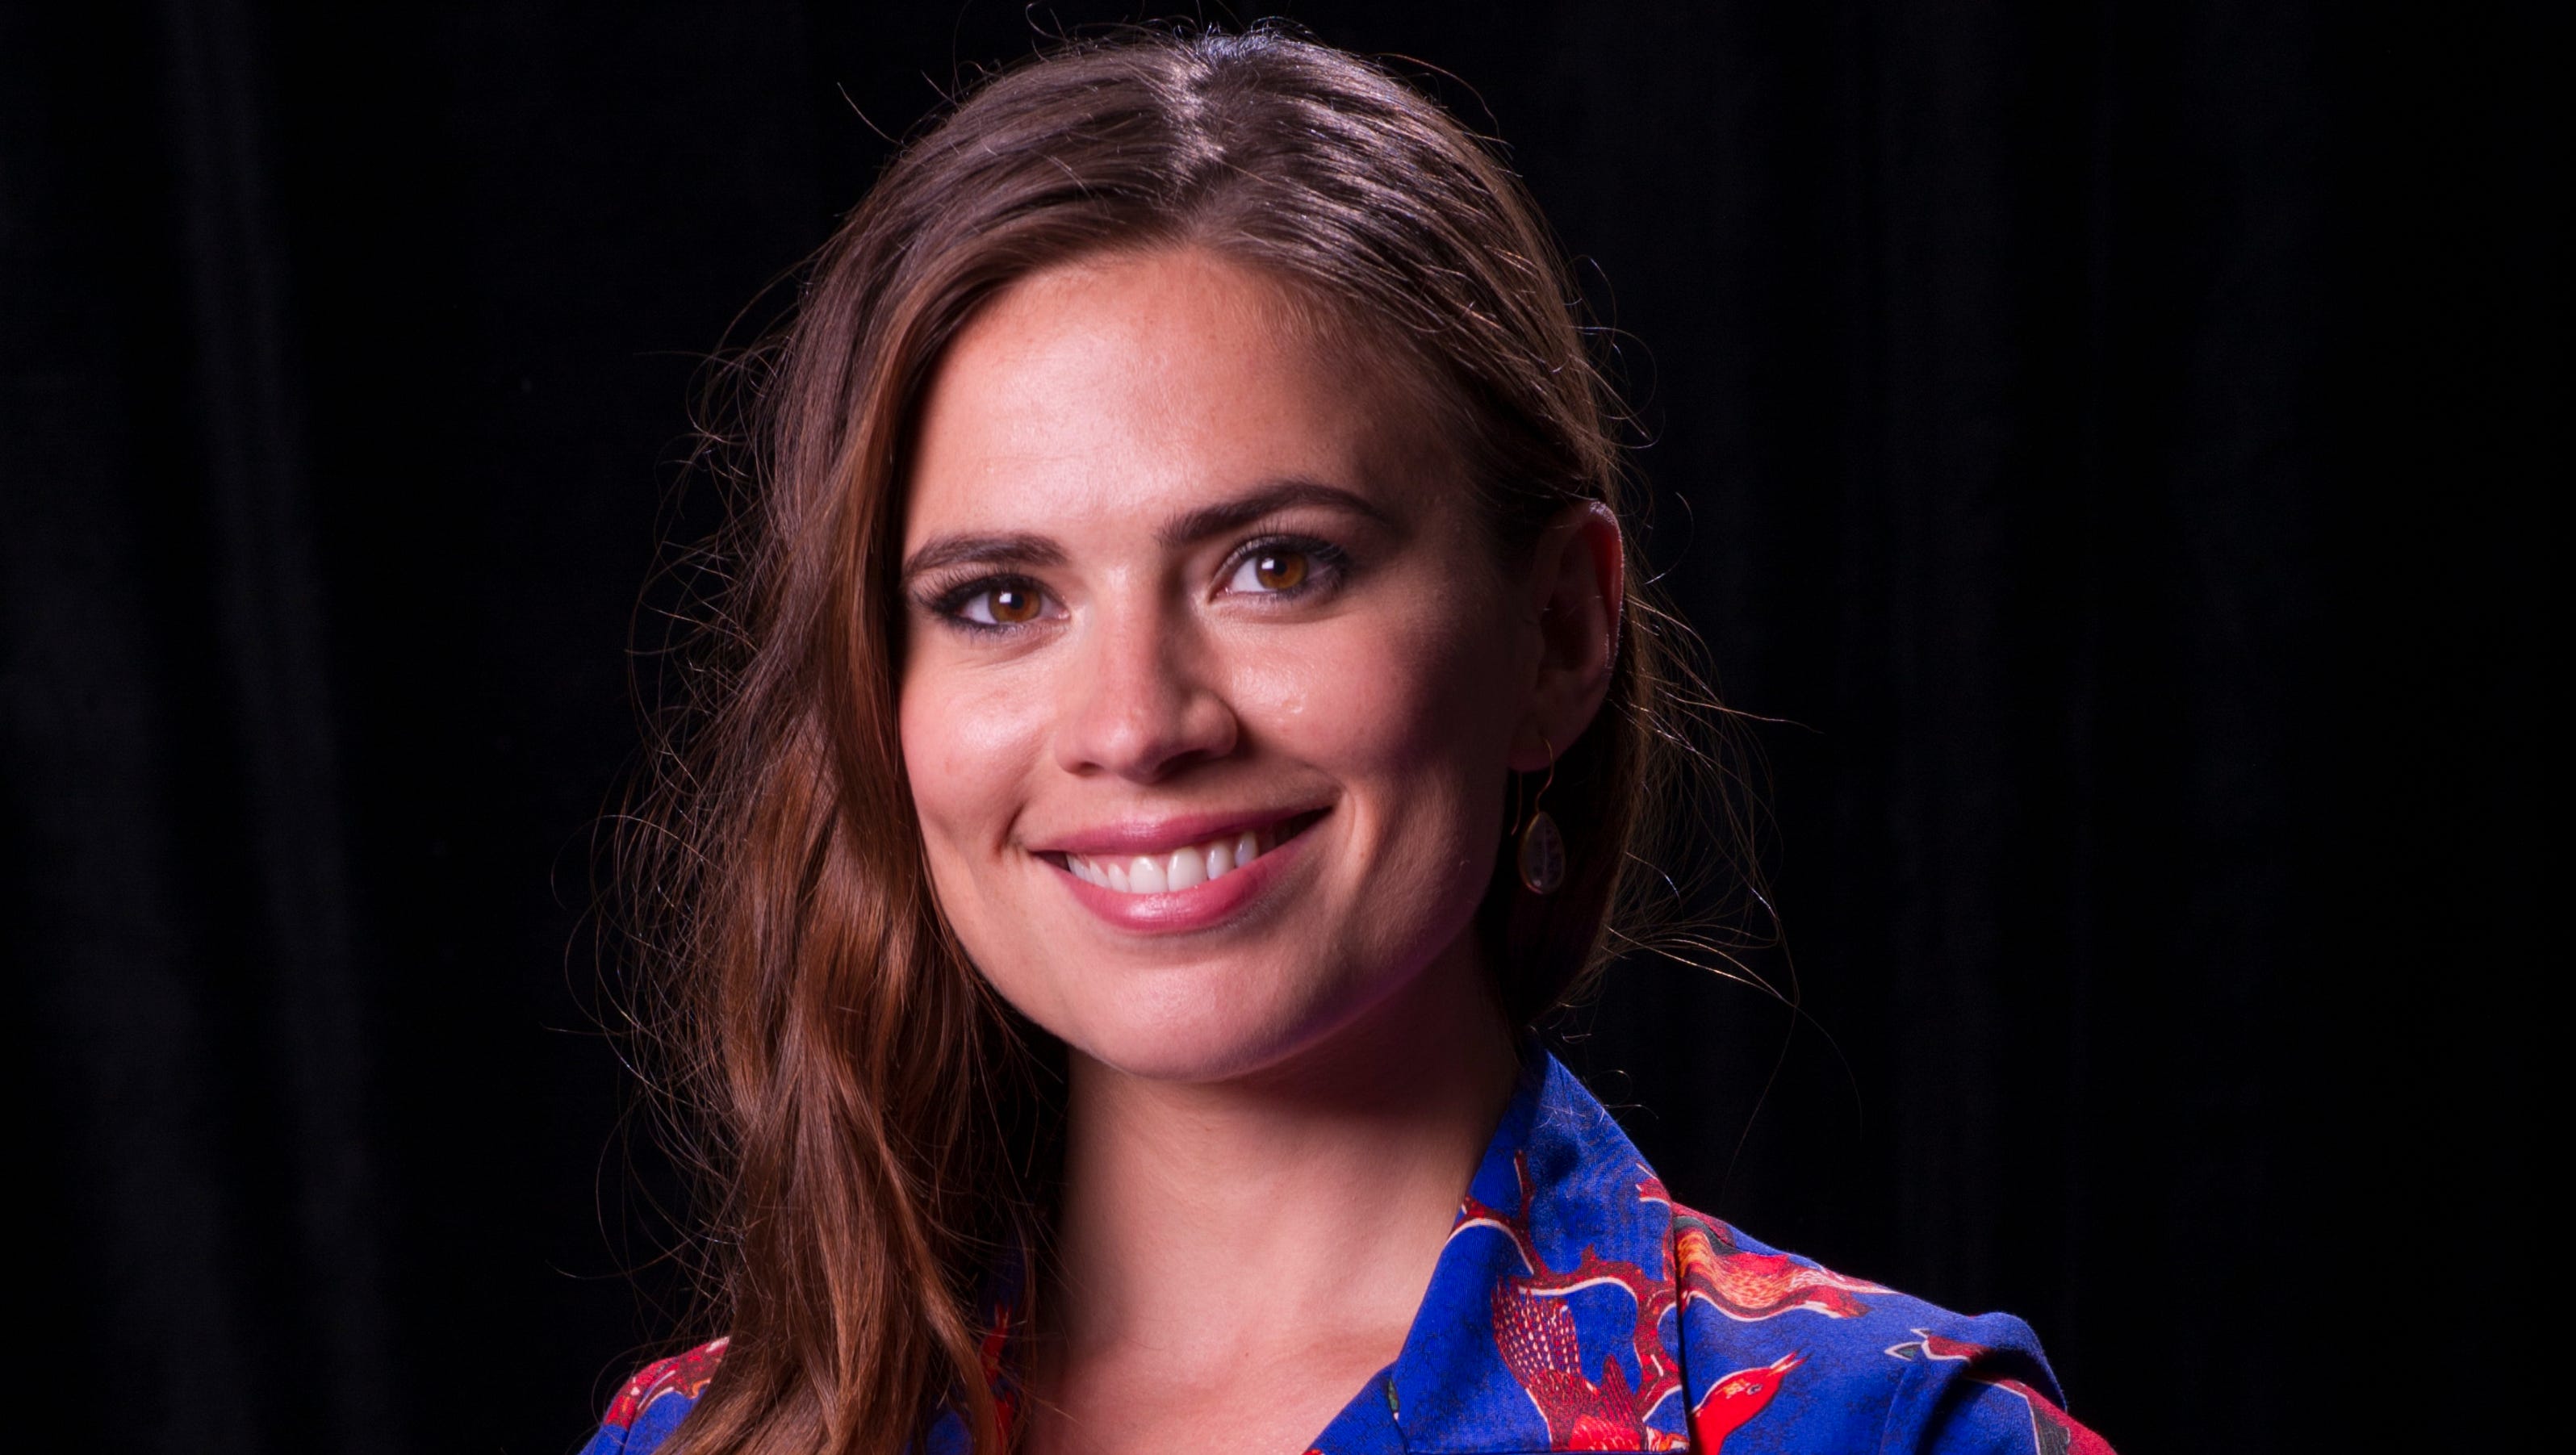 Hayley Atwell's 'Agent Carter' defies stereotypes3200 x 1800